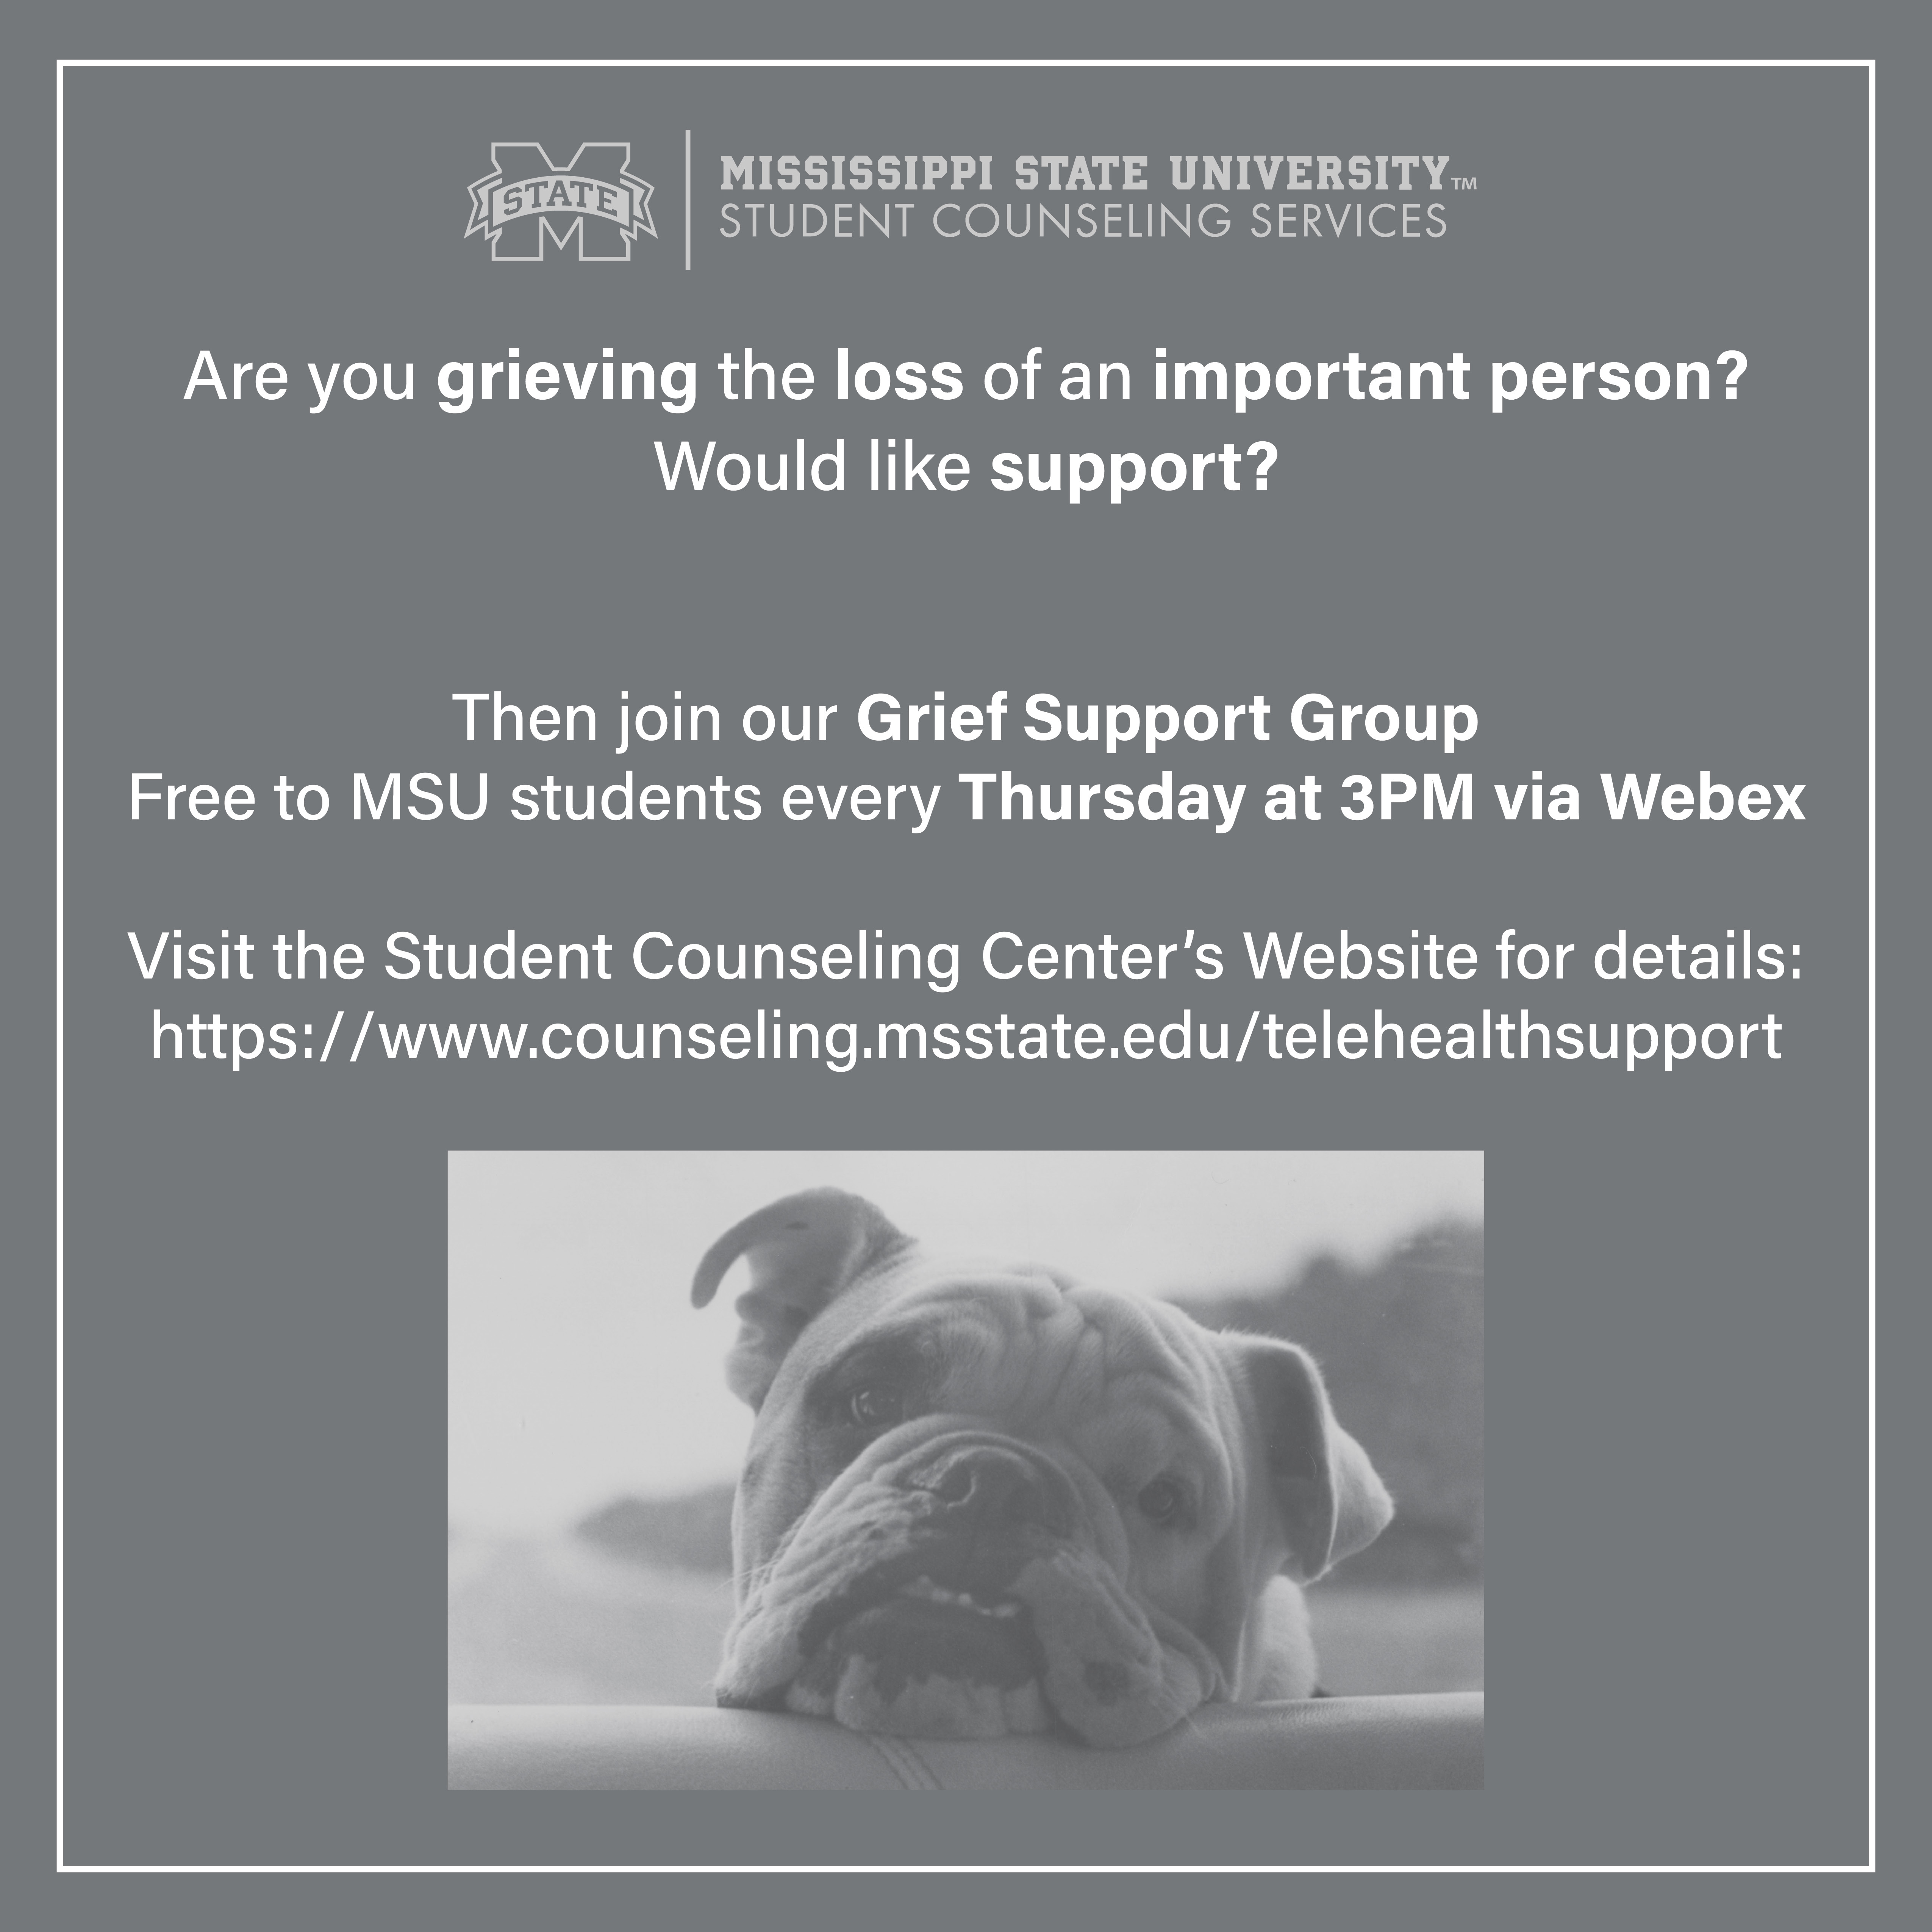 Student Counseling Services is offering a virtual grief support group every Thursday from 3-4PM. Join us by following the link below.